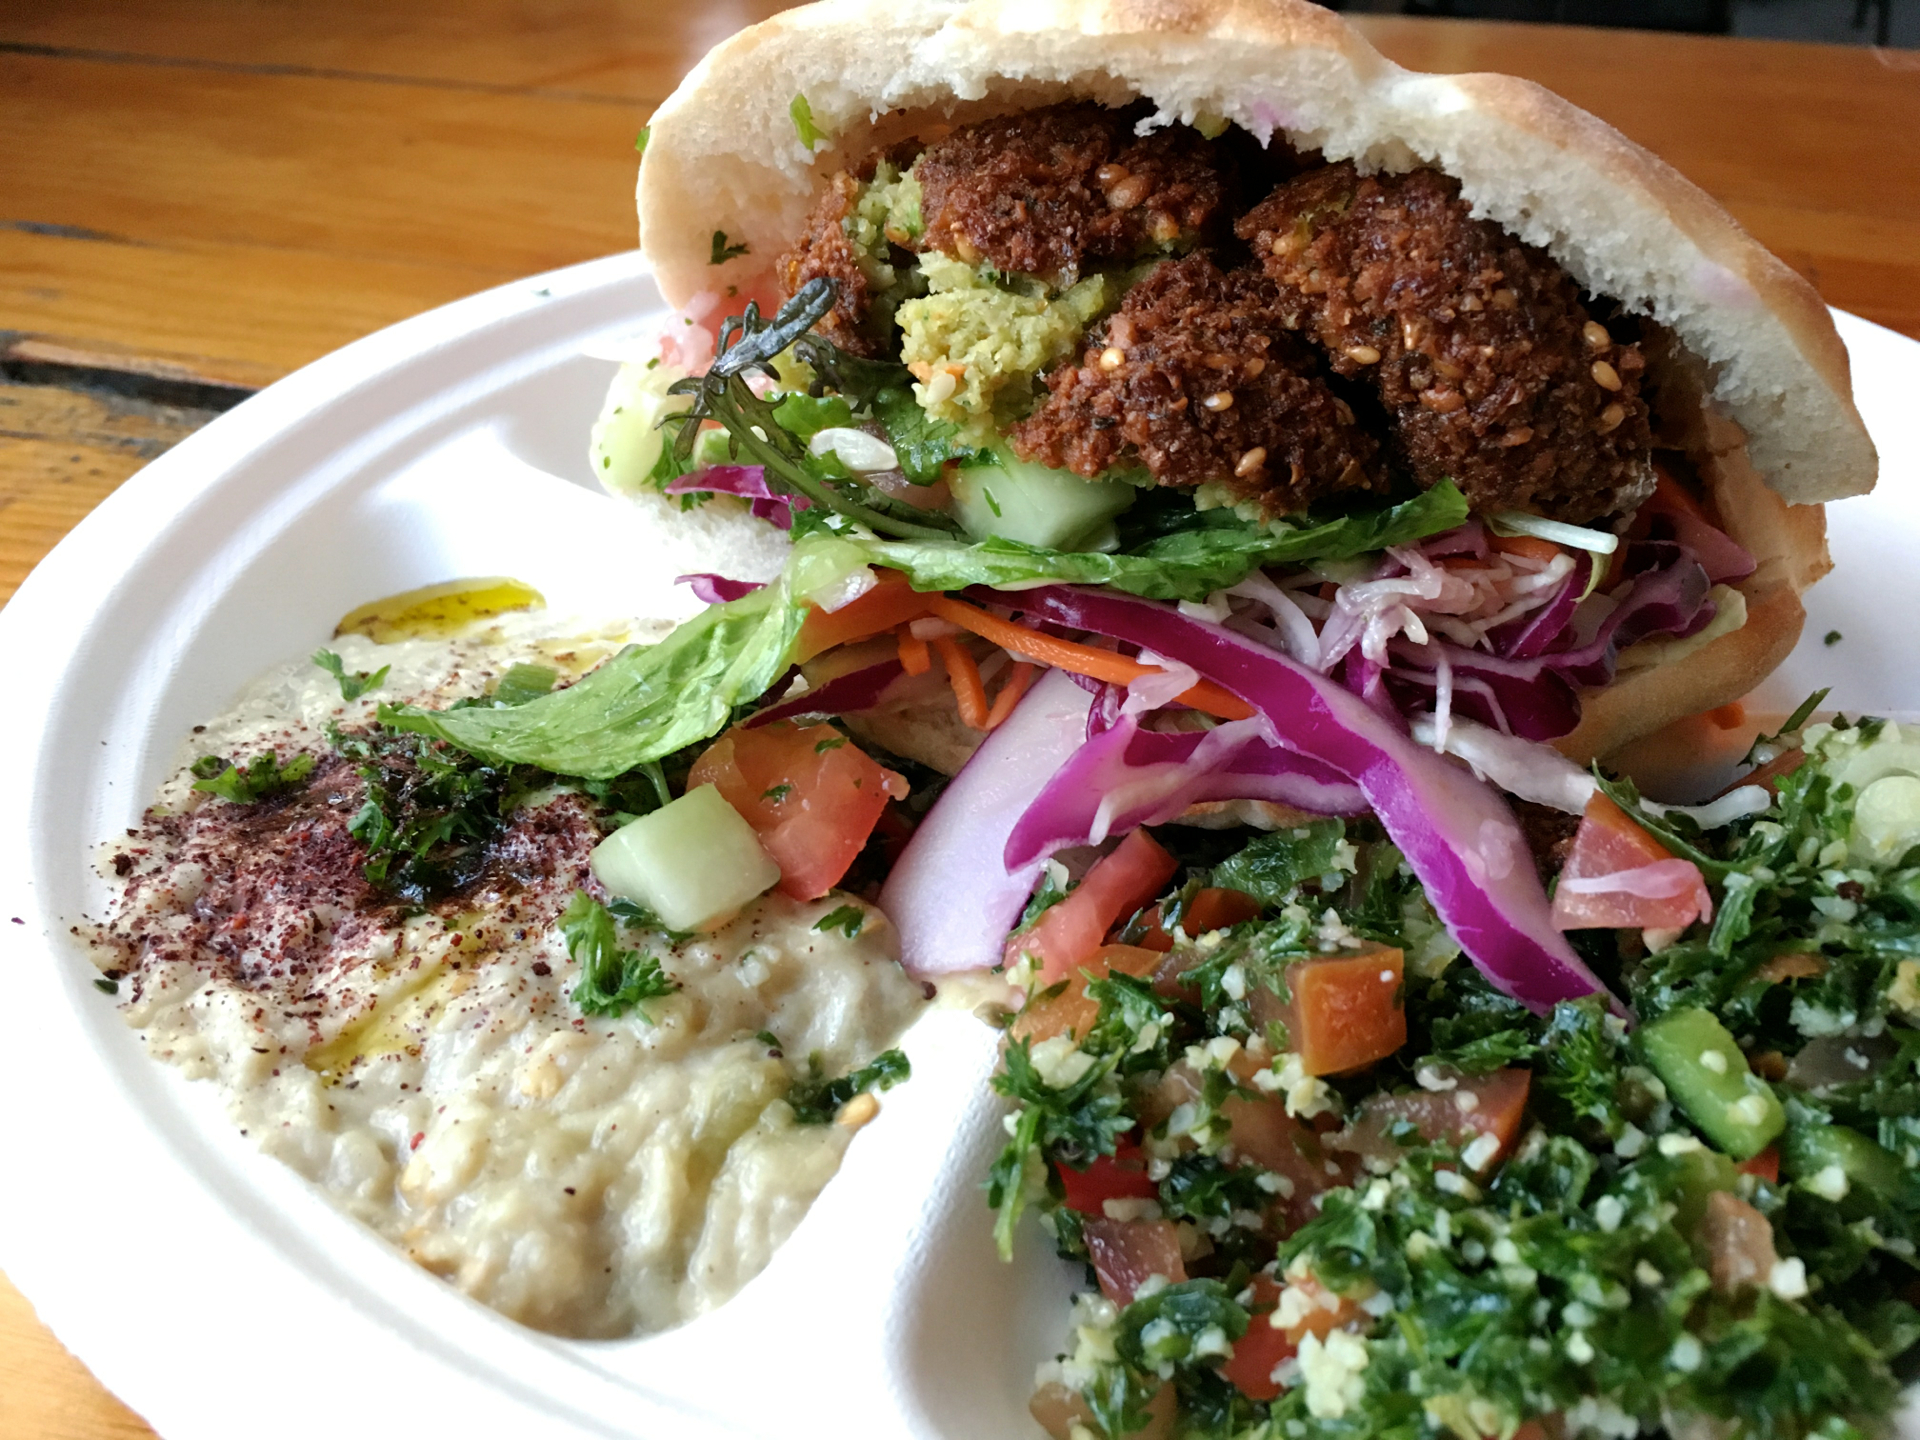 A falafel pita with baba ganoush and tabbouleh at Dish n Dash in Sunnyvale.